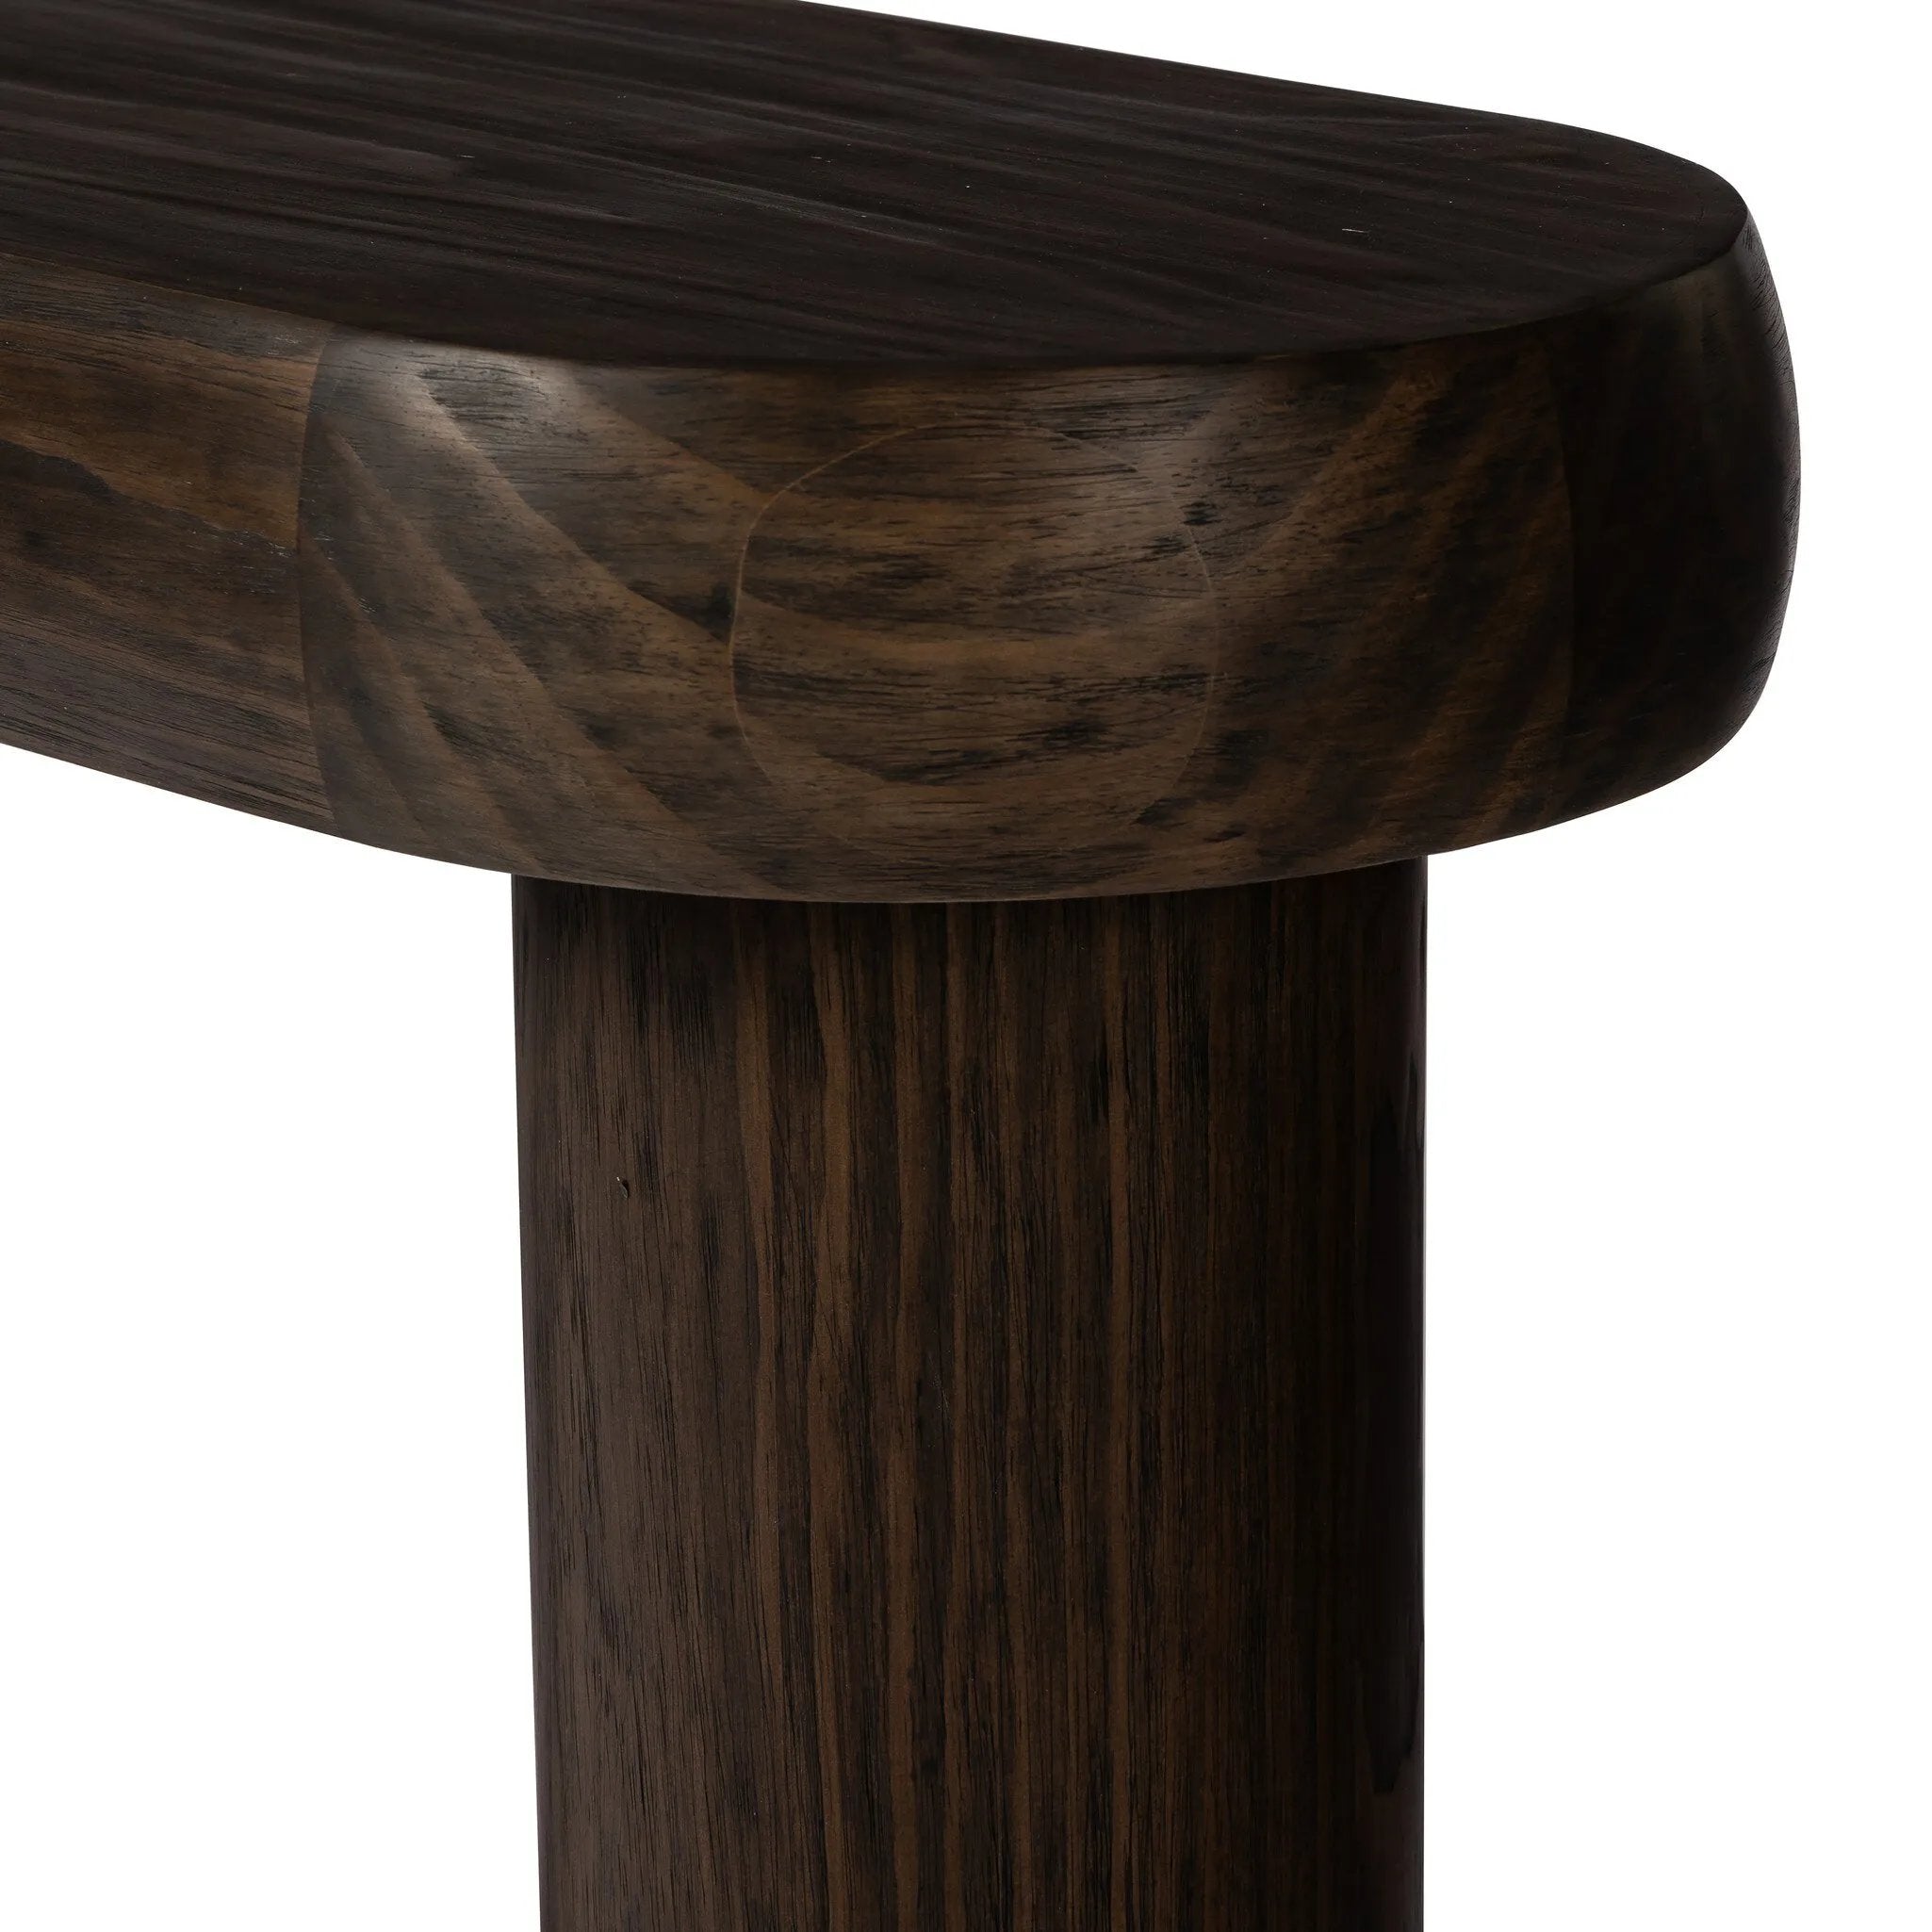 Three round pillar legs support a thick oval top featuring rounded edges. A dark brown pine finish showcases rich grain movement, playing up the curvature of this piece.Collection: Westgat Amethyst Home provides interior design, new home construction design consulting, vintage area rugs, and lighting in the Dallas metro area.